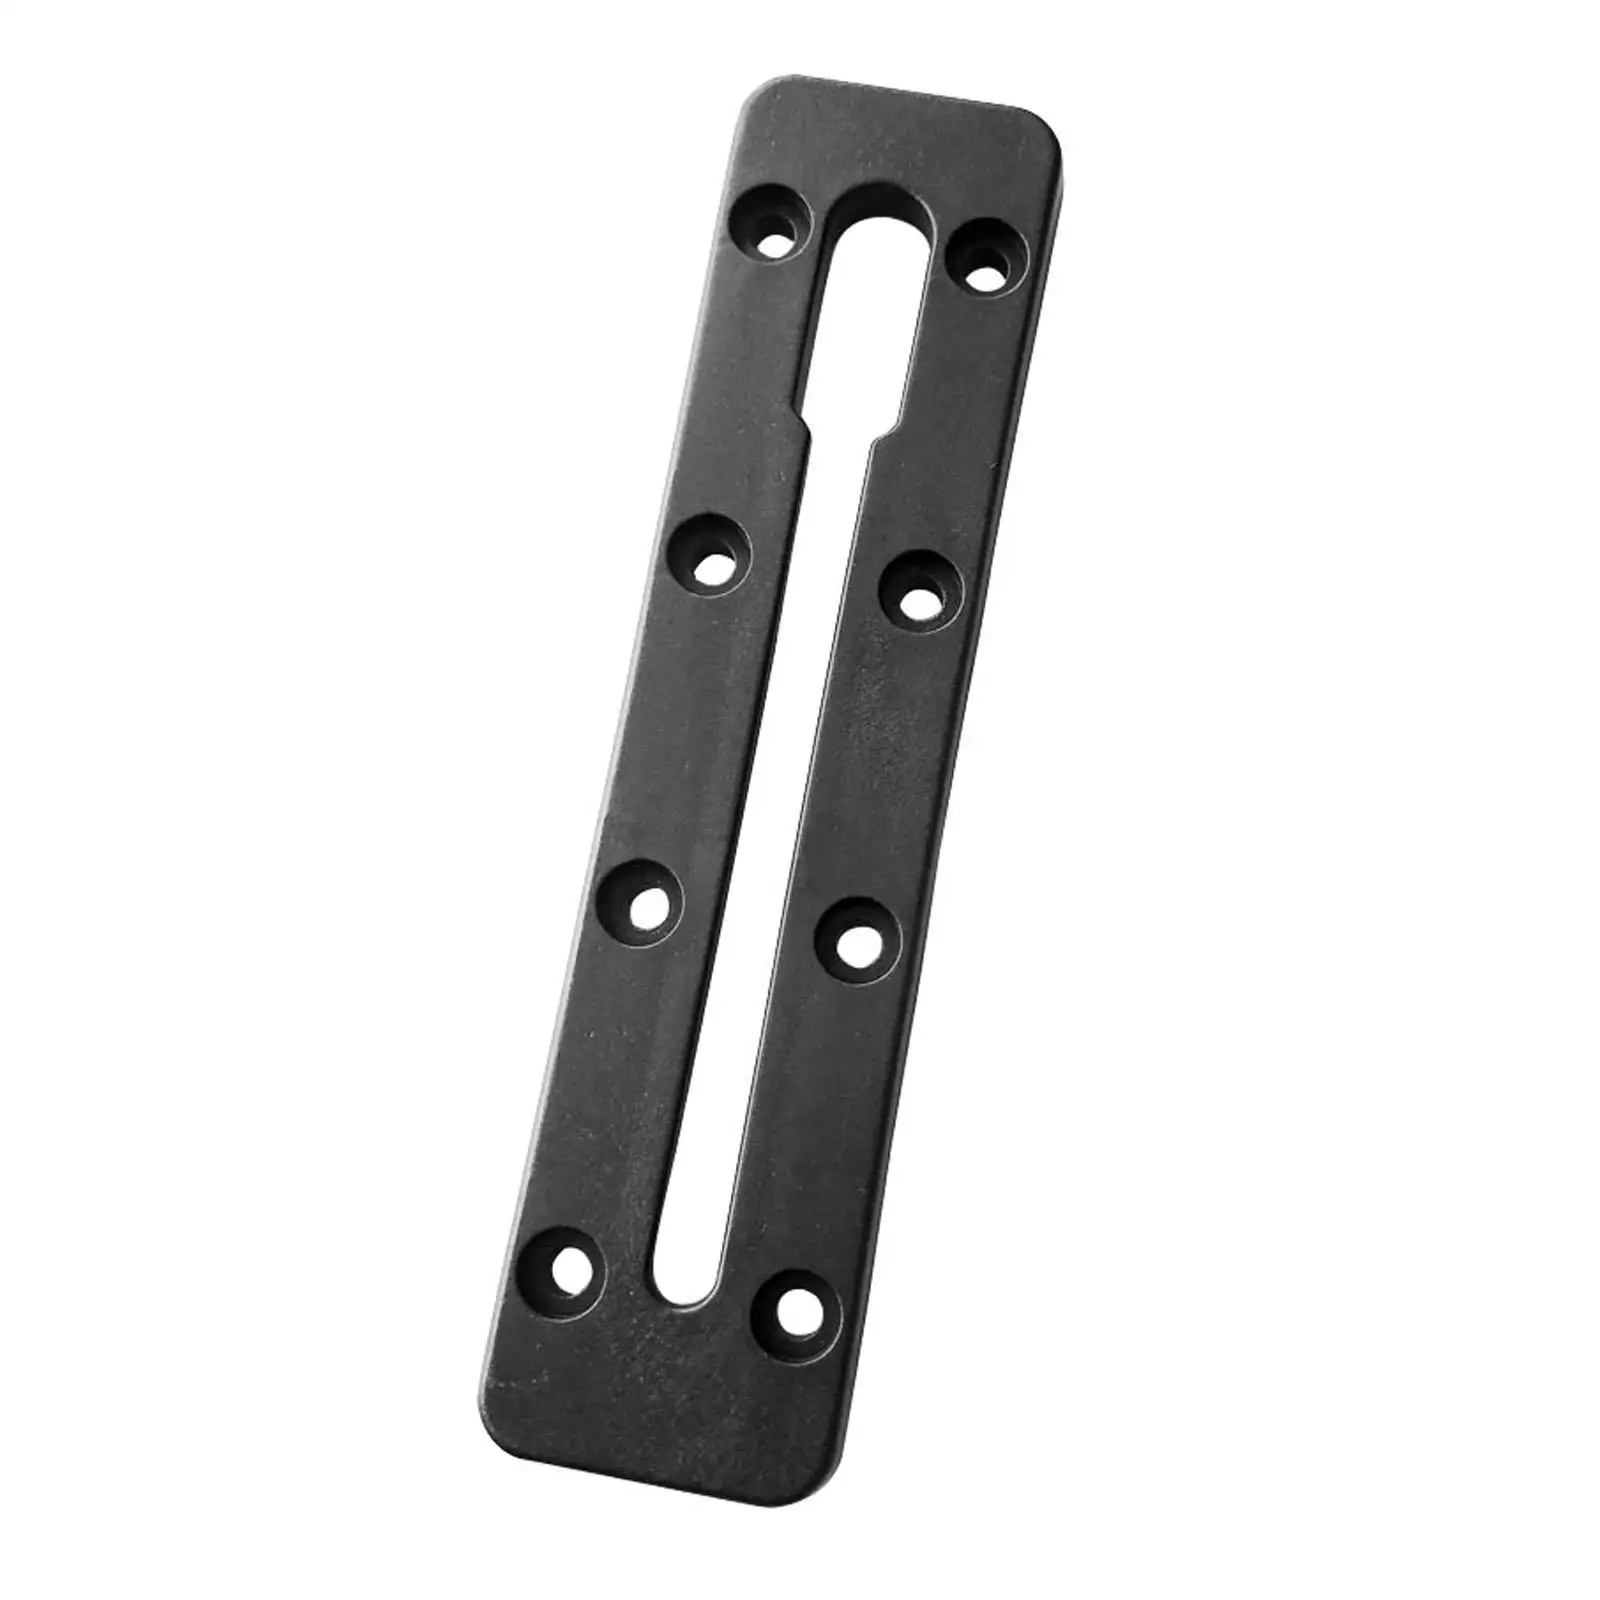 Kayak Slide Track Replacements Easy to Install Fishing Rod Holder Accessory for Fishing